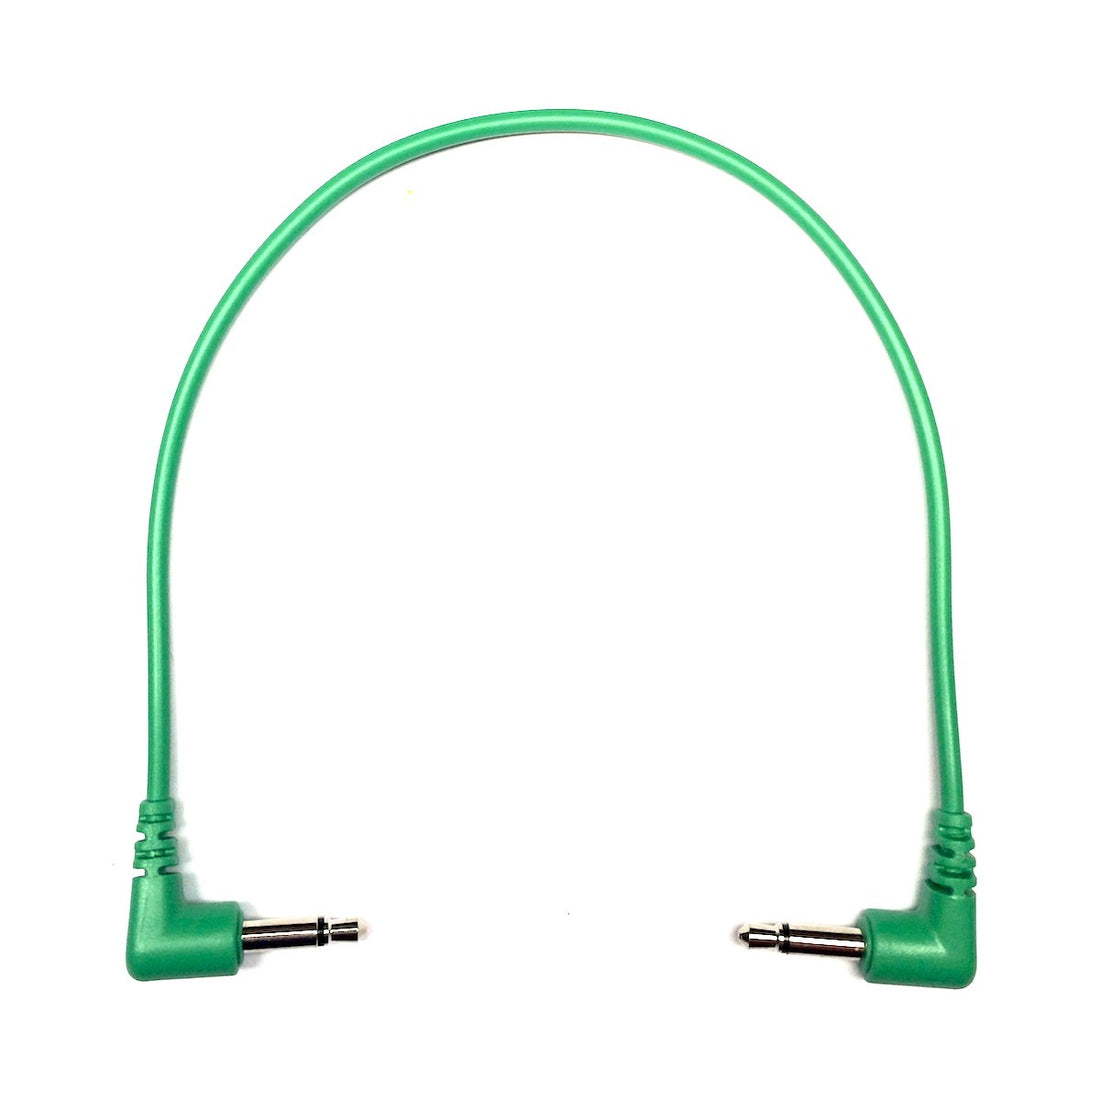 Patch Cable - Emerald 20cm (6 Pack)